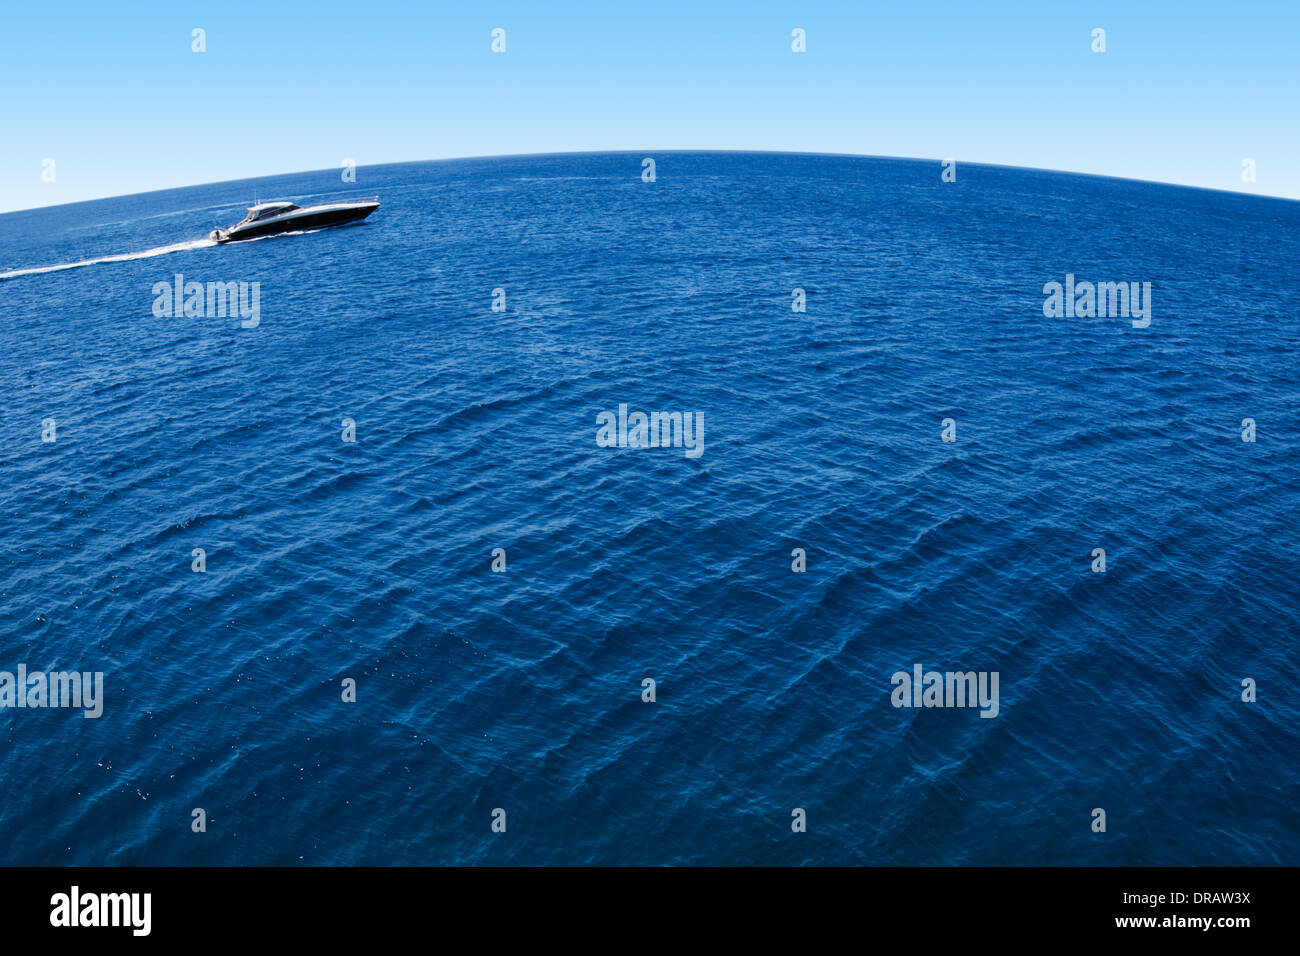 A motor yacht drives through the blue planet Stock Photo